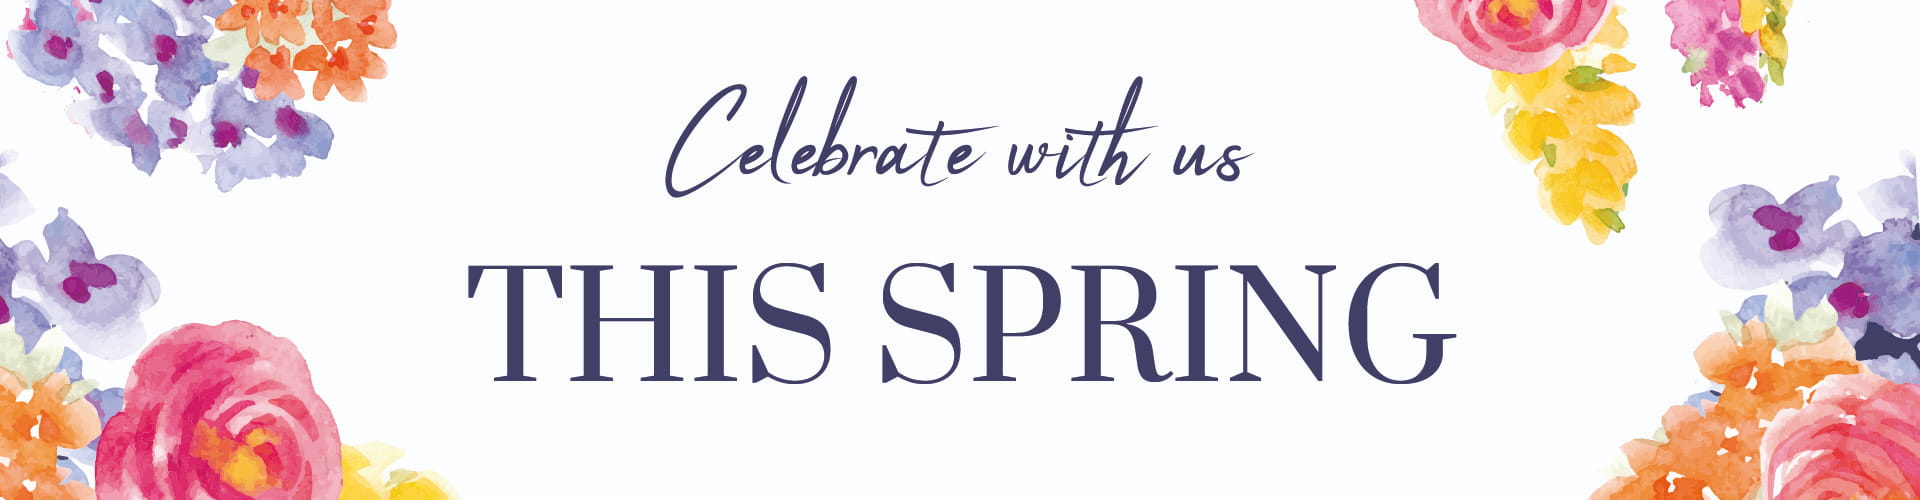 Spring Offers in Barnet | Prince Of Wales